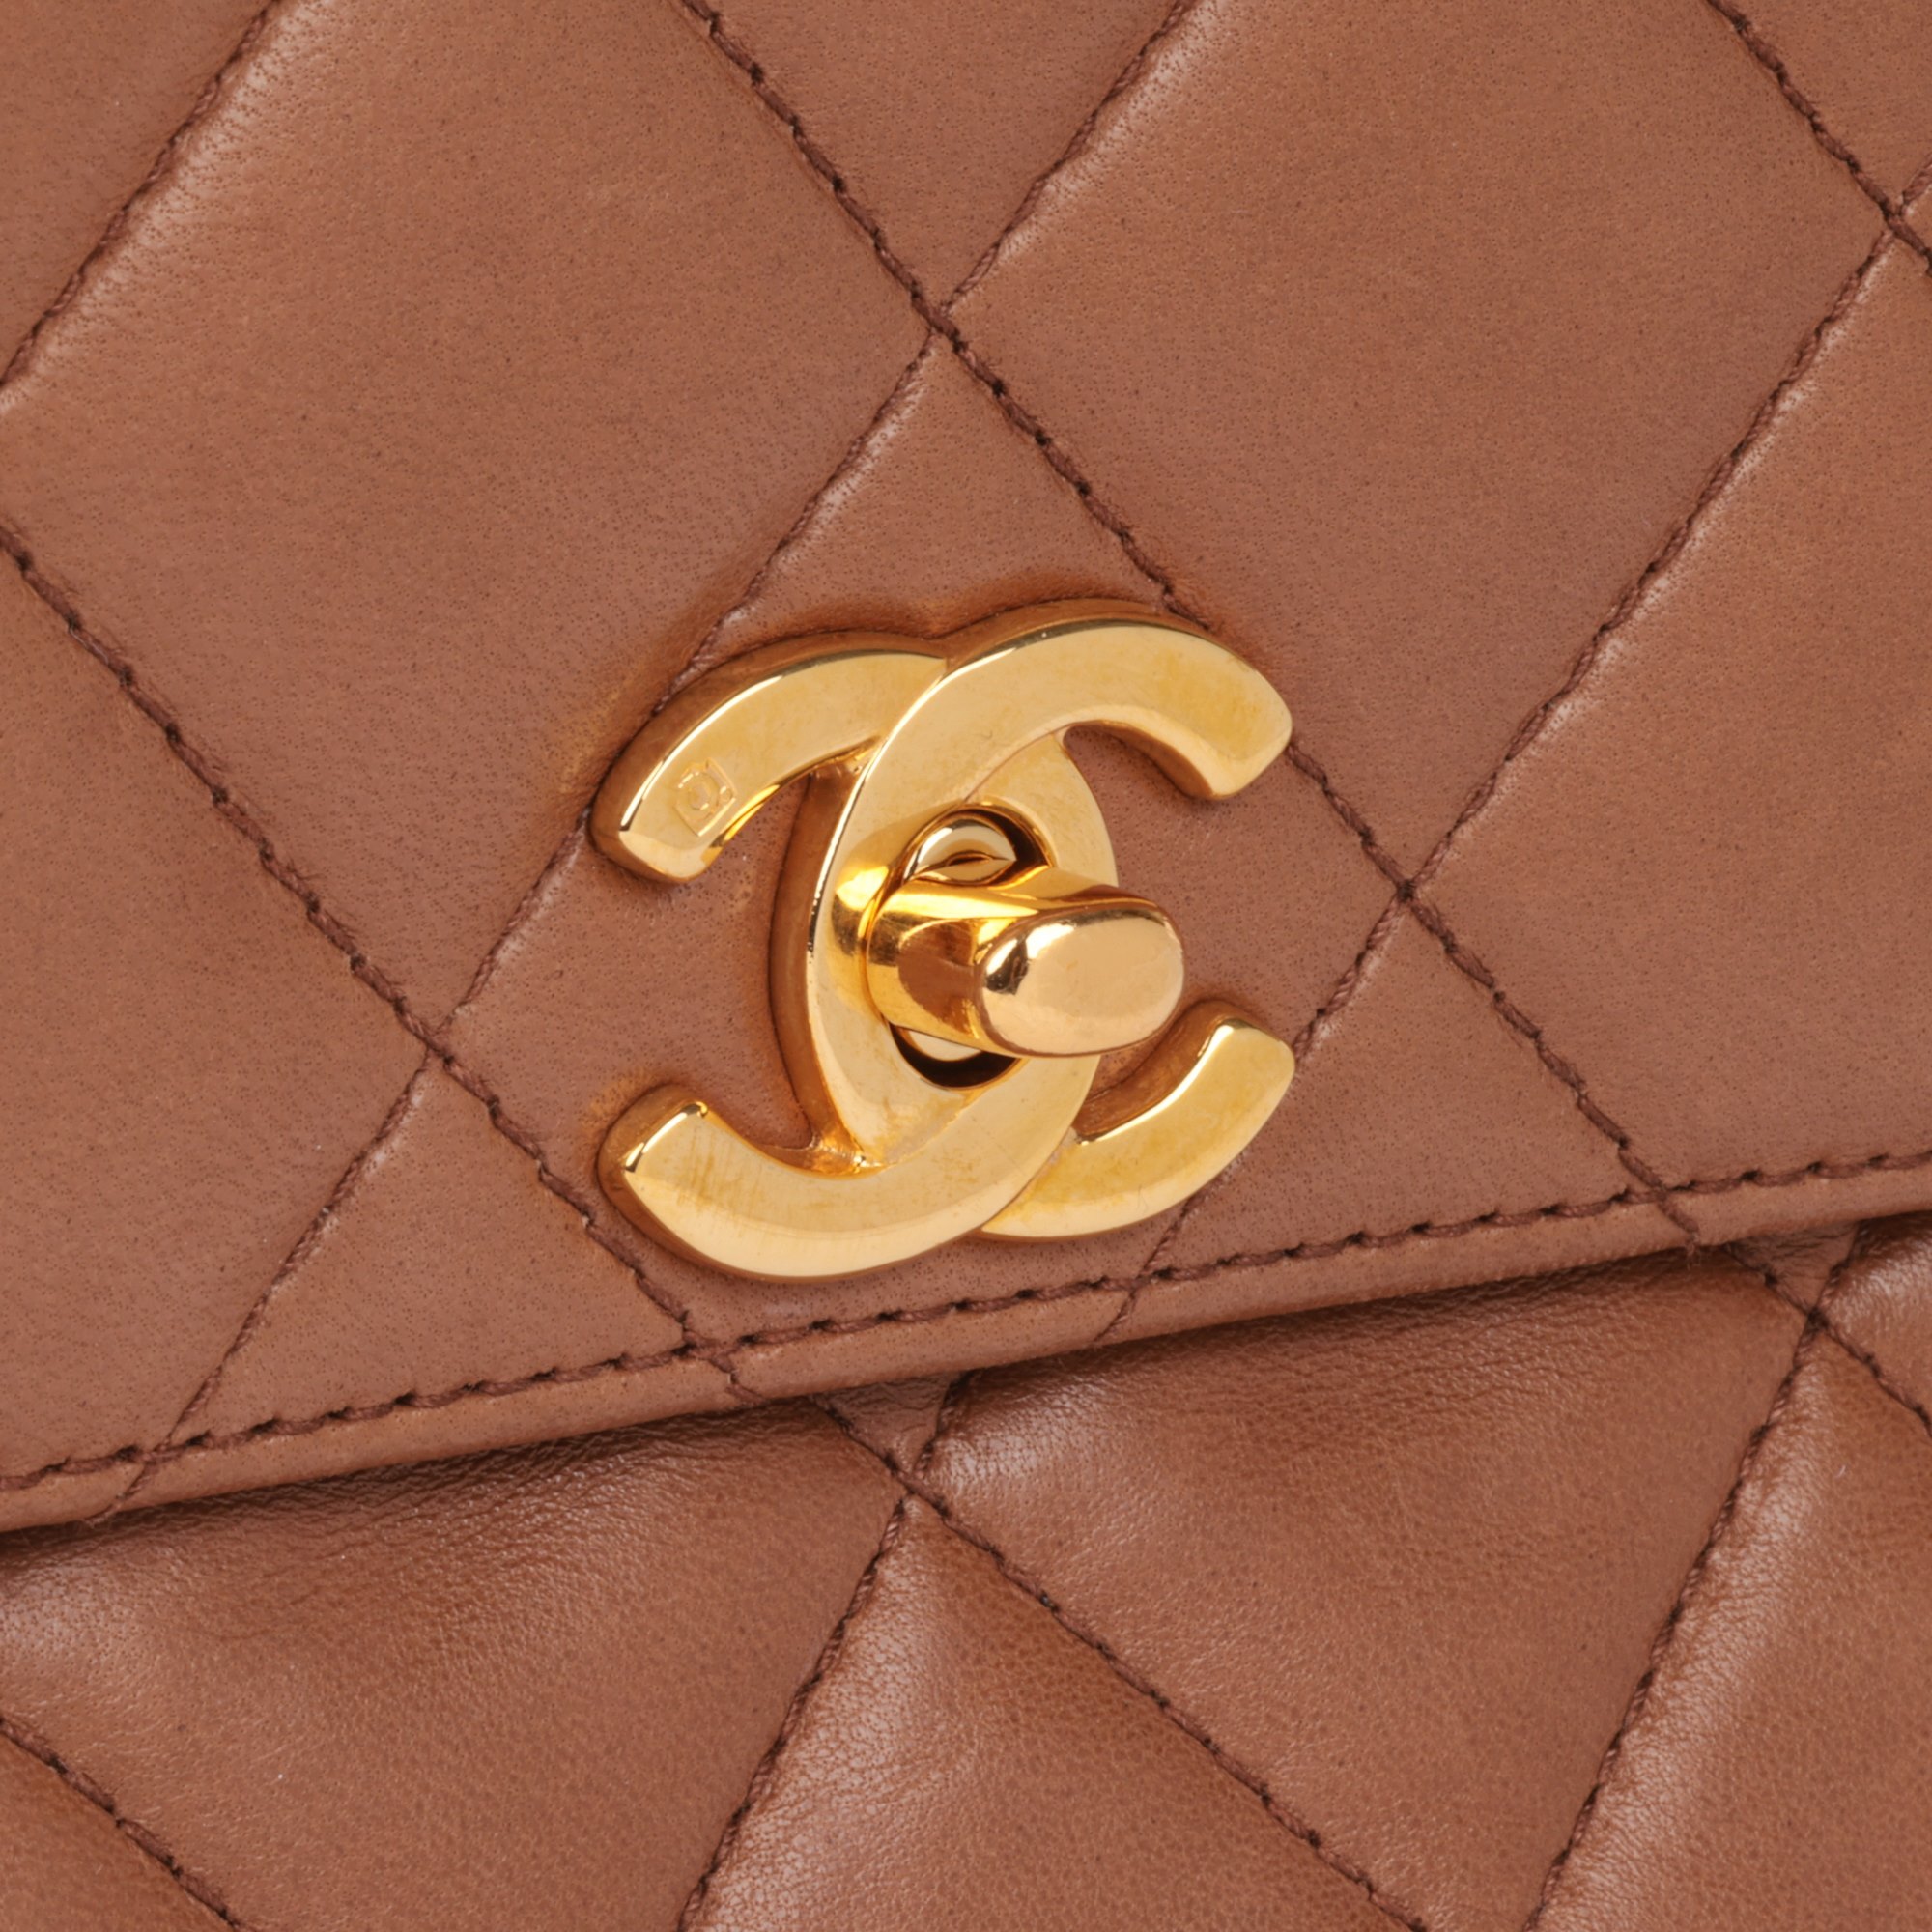 Chanel Caramel Quilted Lambskin Vintage Small Classic Single Flap Bag